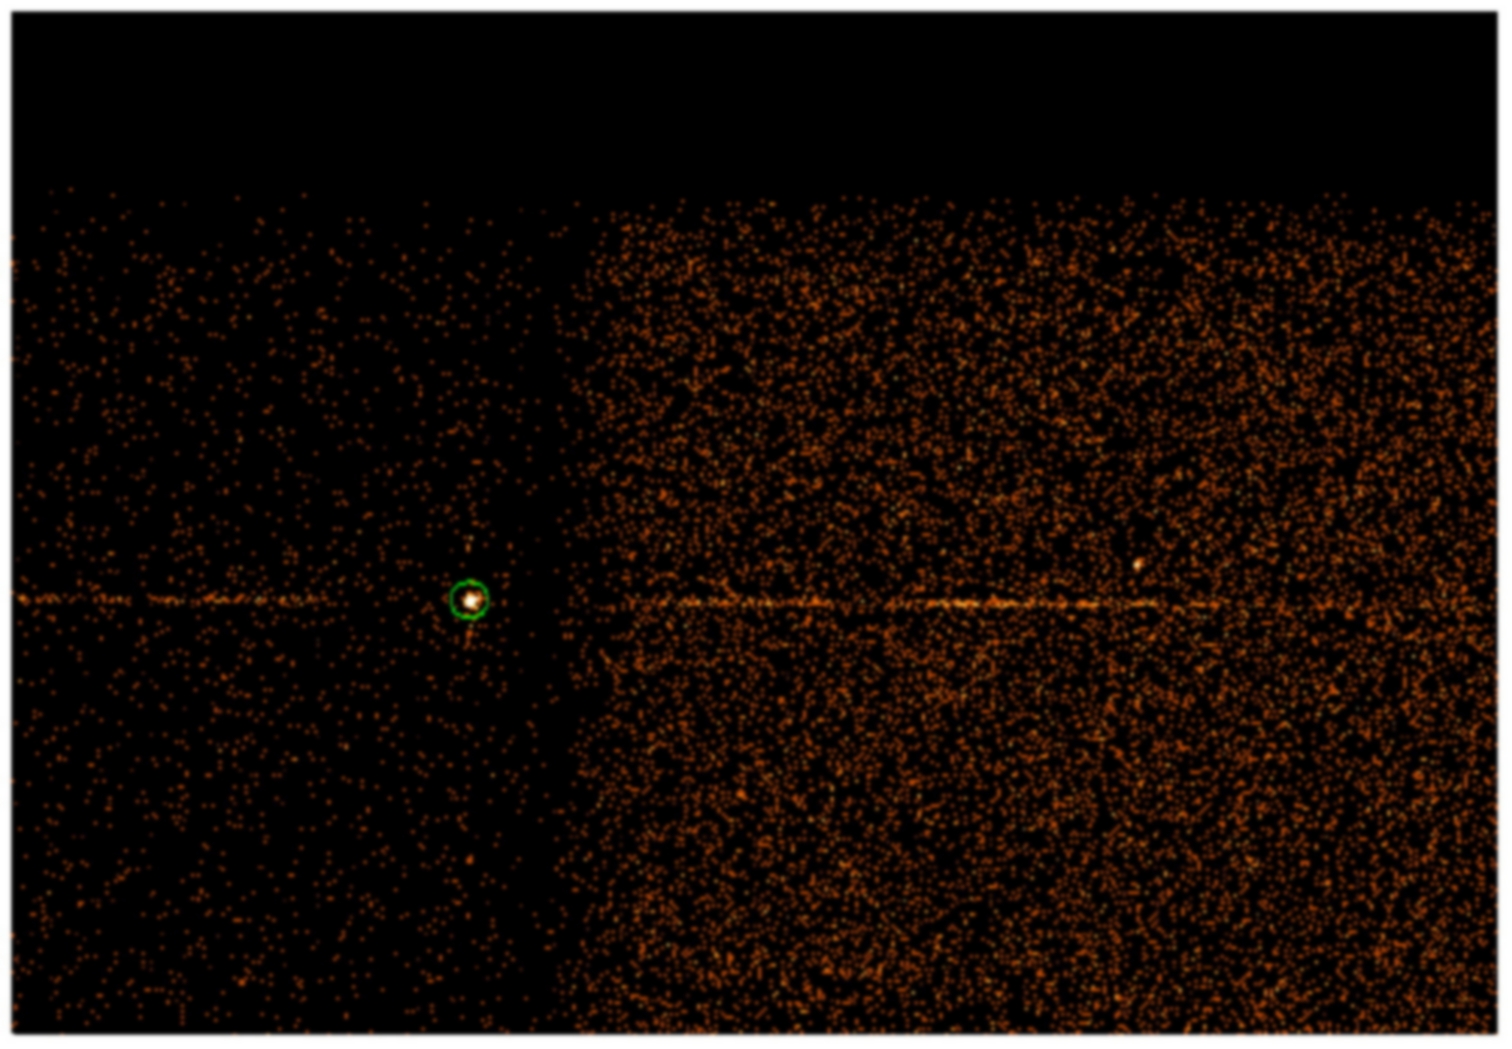 Chandra/LETG observation of GRB 020405 afterglow